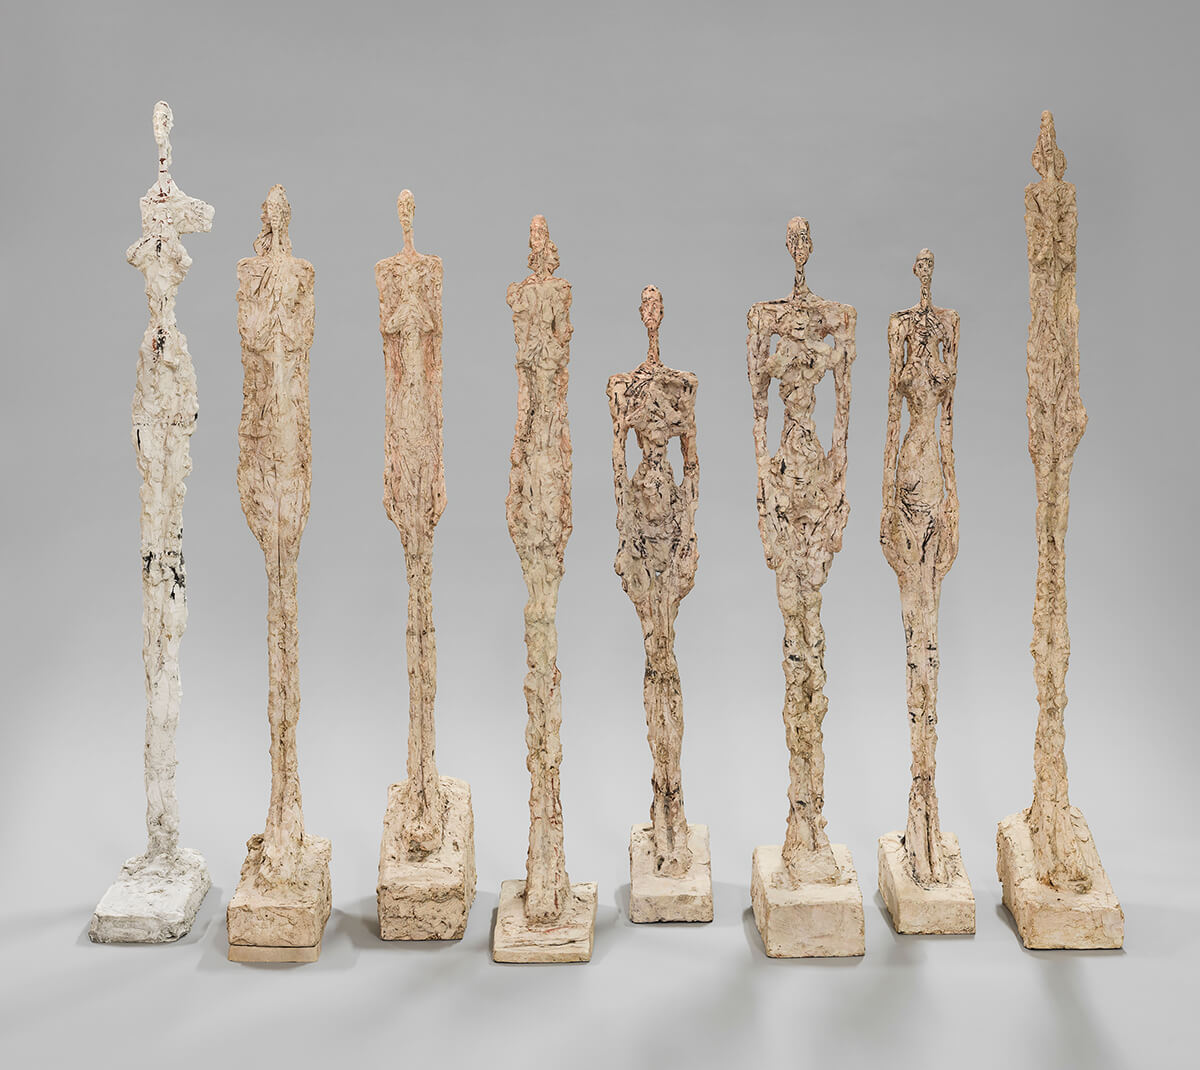 Swiss sculptor Giacometti's famous collective of female sculptures entitled Women of Venice